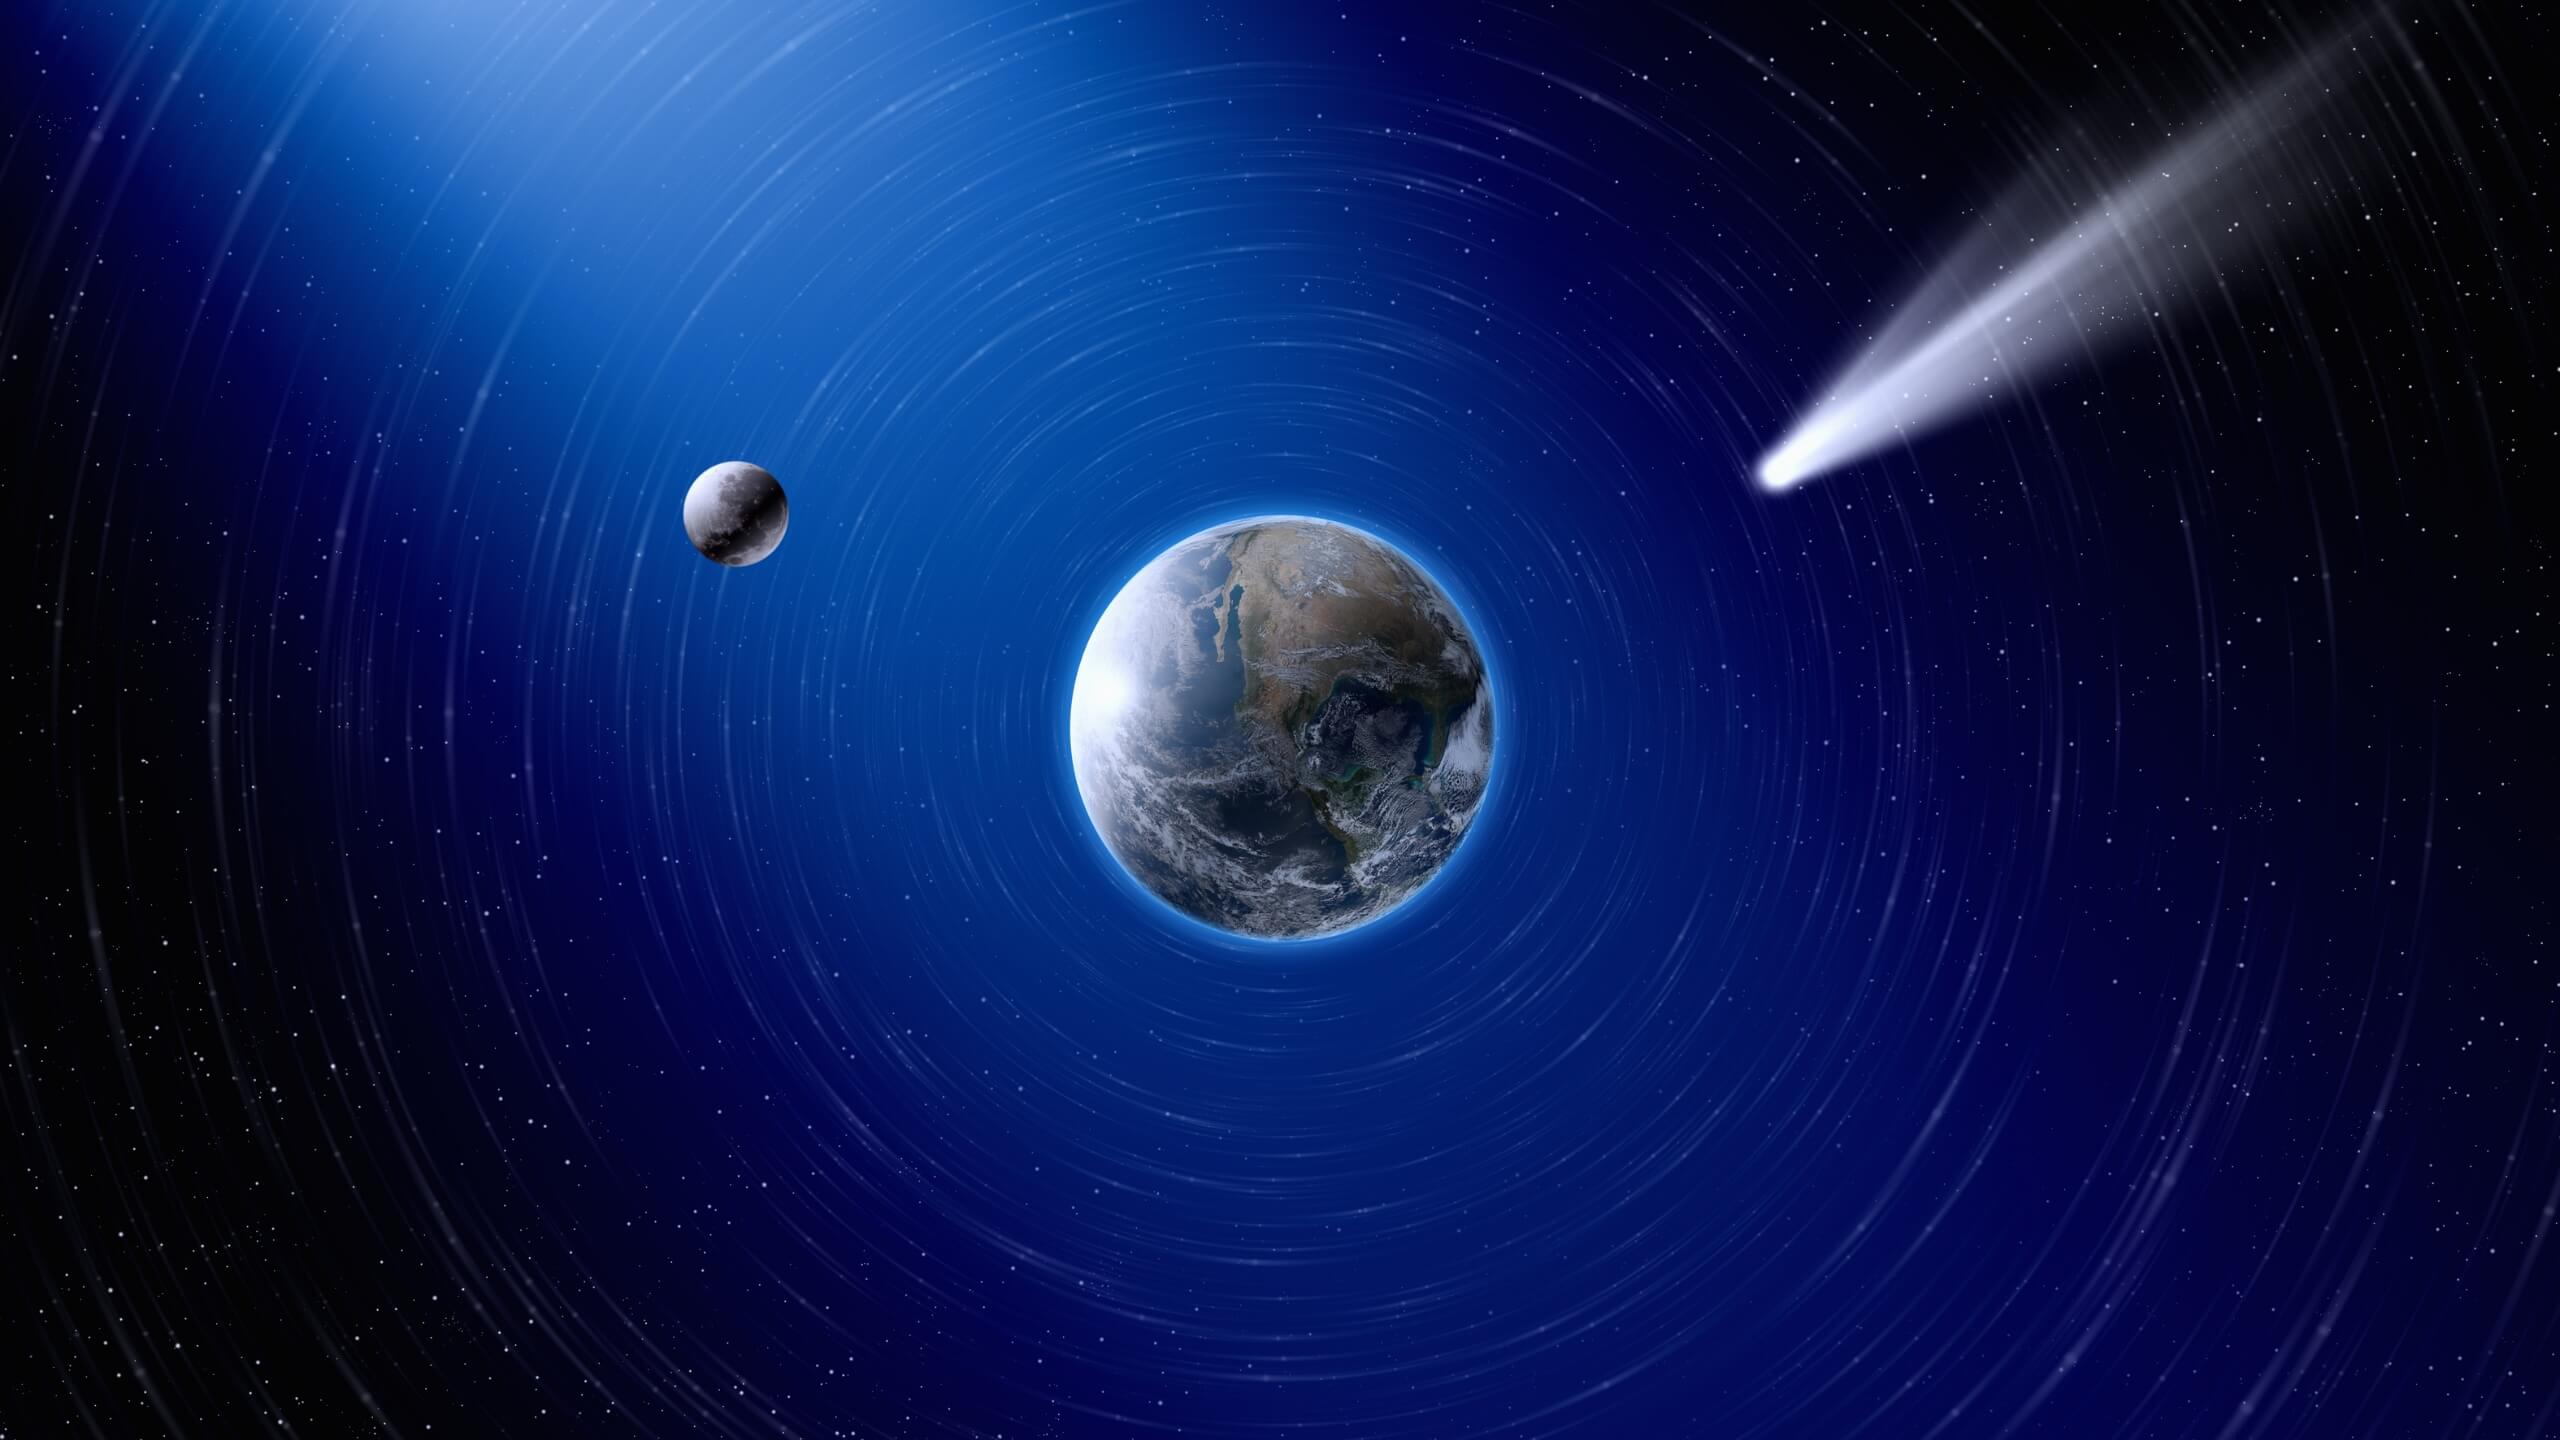 Some theories suggest that earth's water came from comets